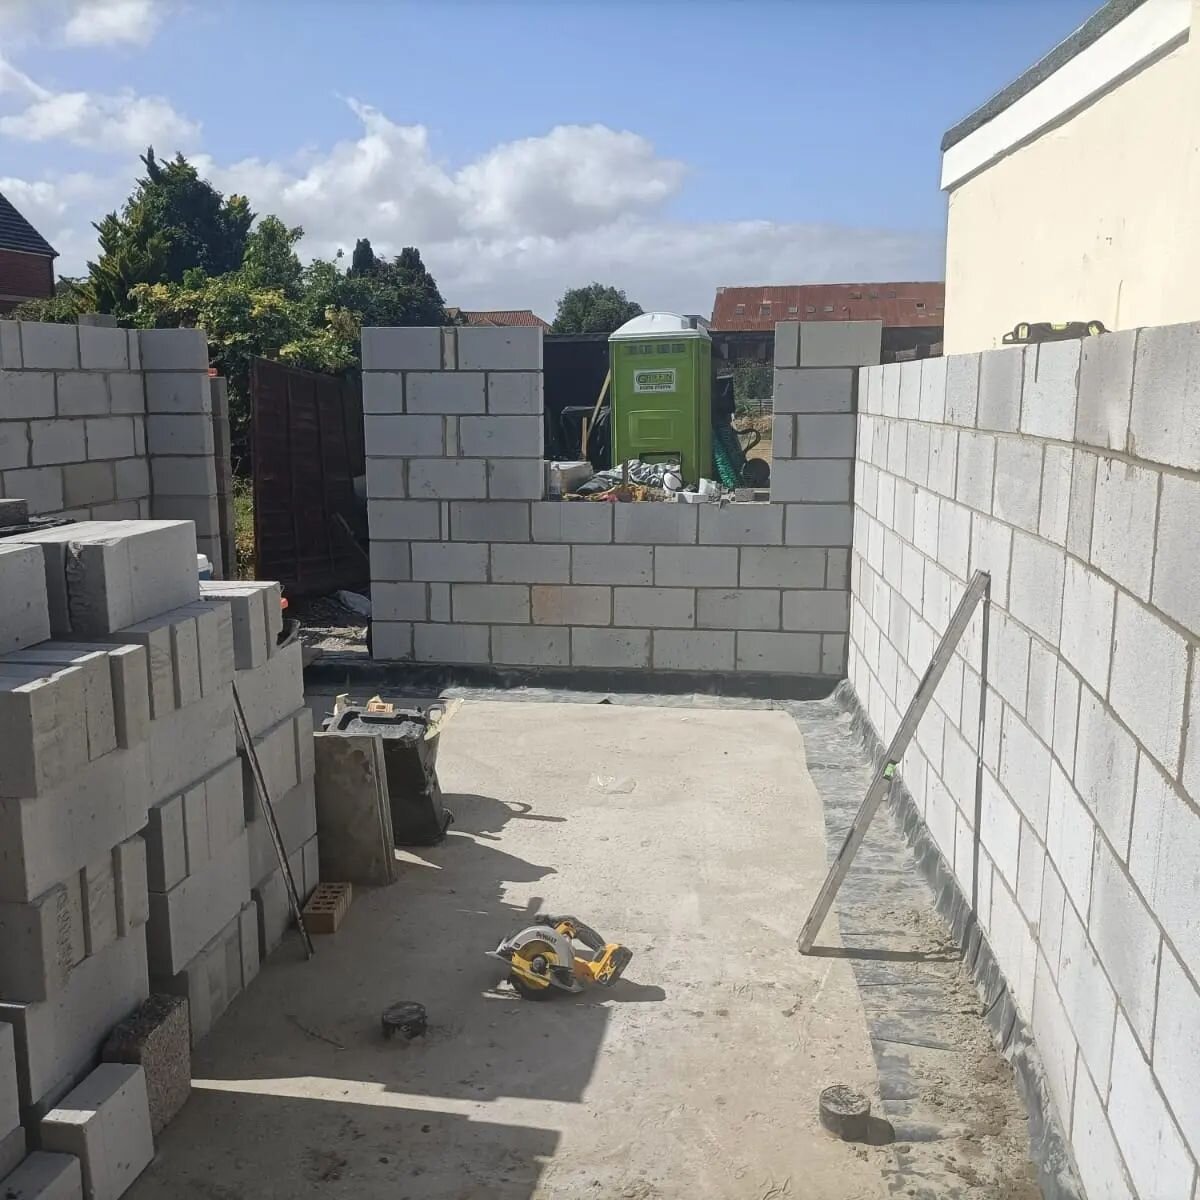 🤩 The team have been making great progress on our Bridgwater project. 

✅️ Drainage complete 

✅️ Foundation masonry completed 

✅️ Groundworks complete 

✅️ Reinforced concrete slab completed 

✅️ Main structure masonry works well underway 

👀 kee